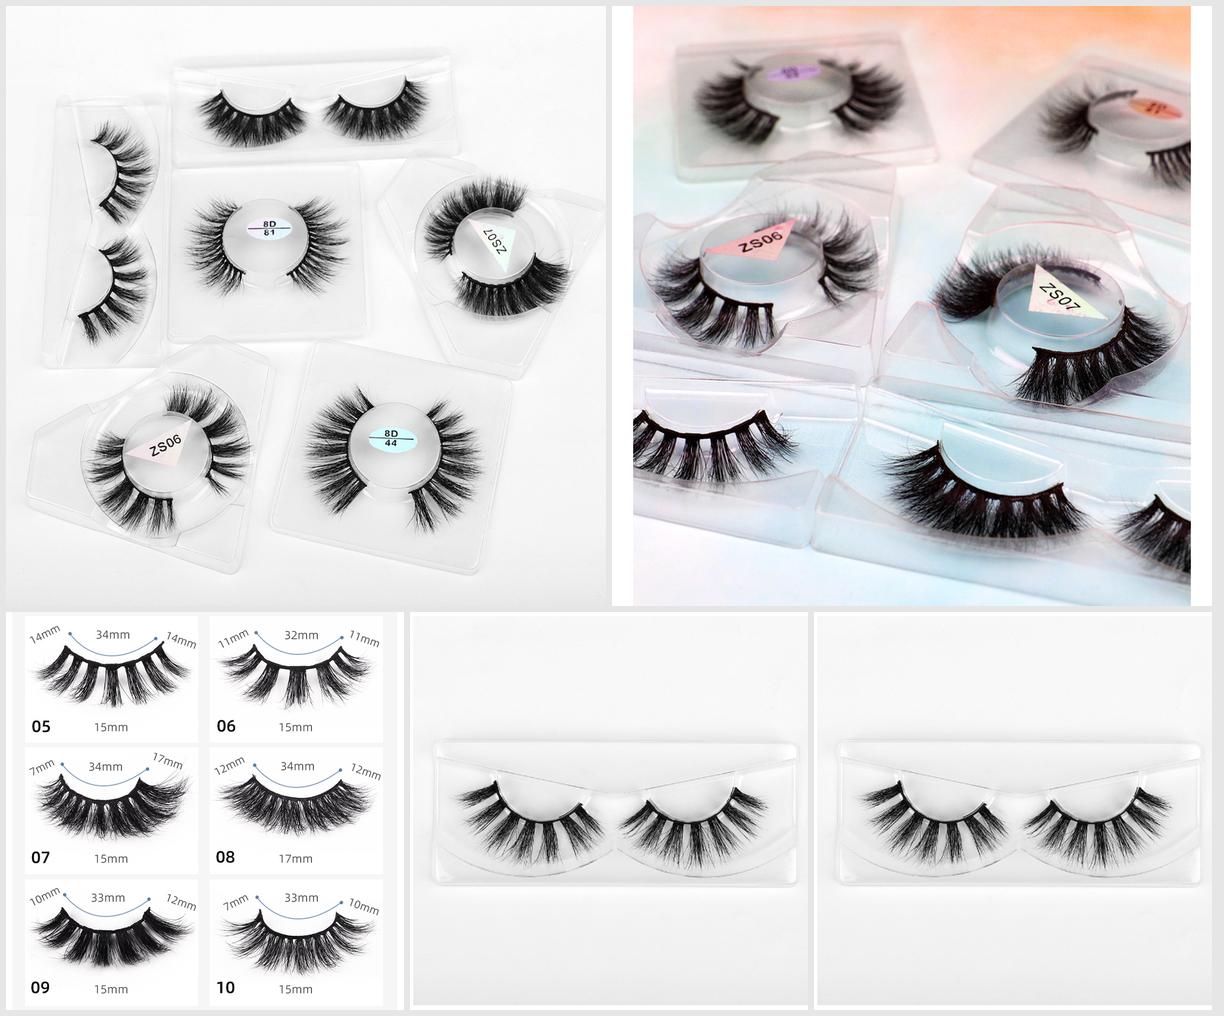 8D thick false eyelashes: spot curling mink hair, a variety of eyelashes, to create your own charm